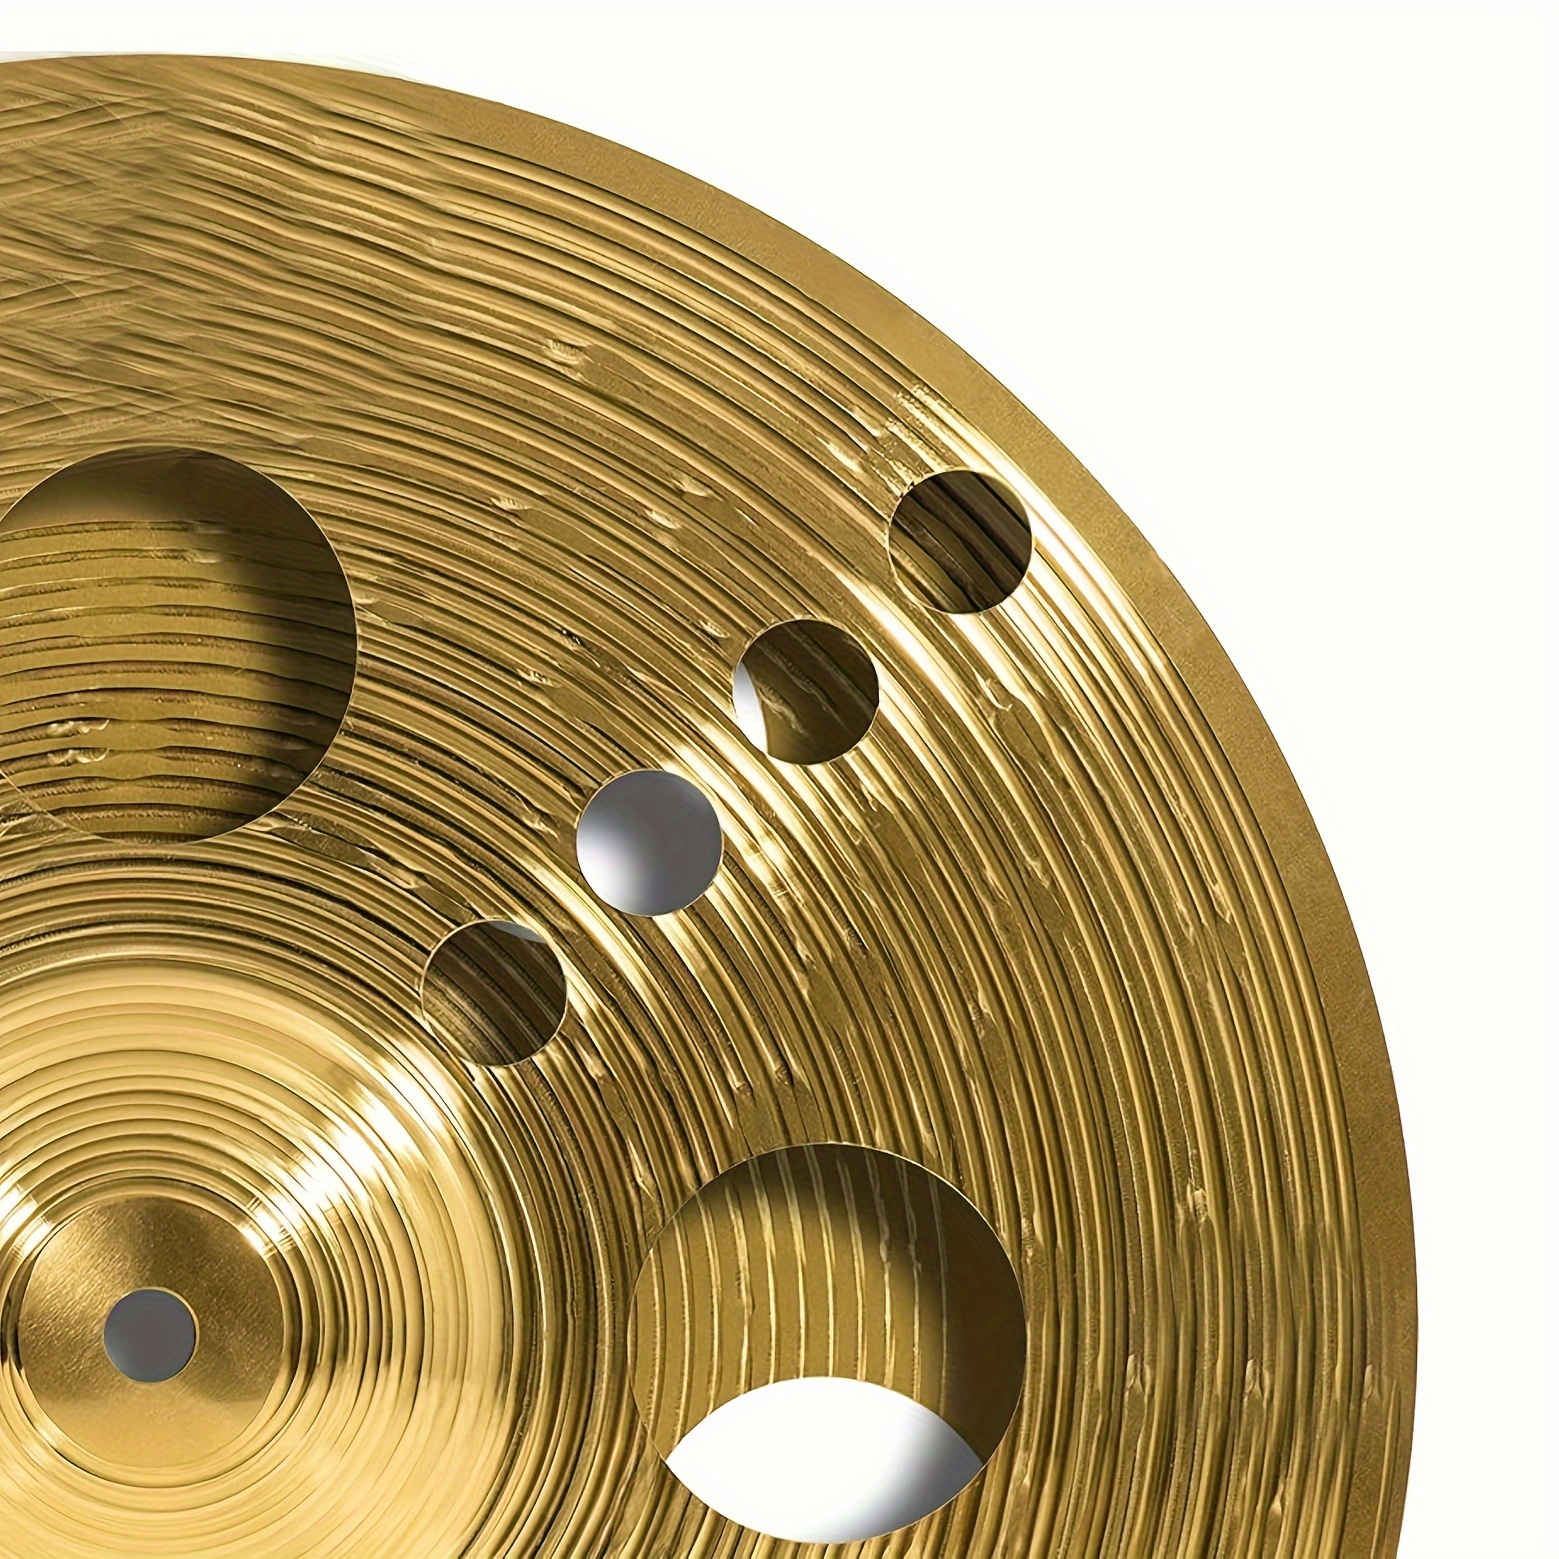  Meinl 14 Trash Stack Cymbal Pair with Holes - HCS